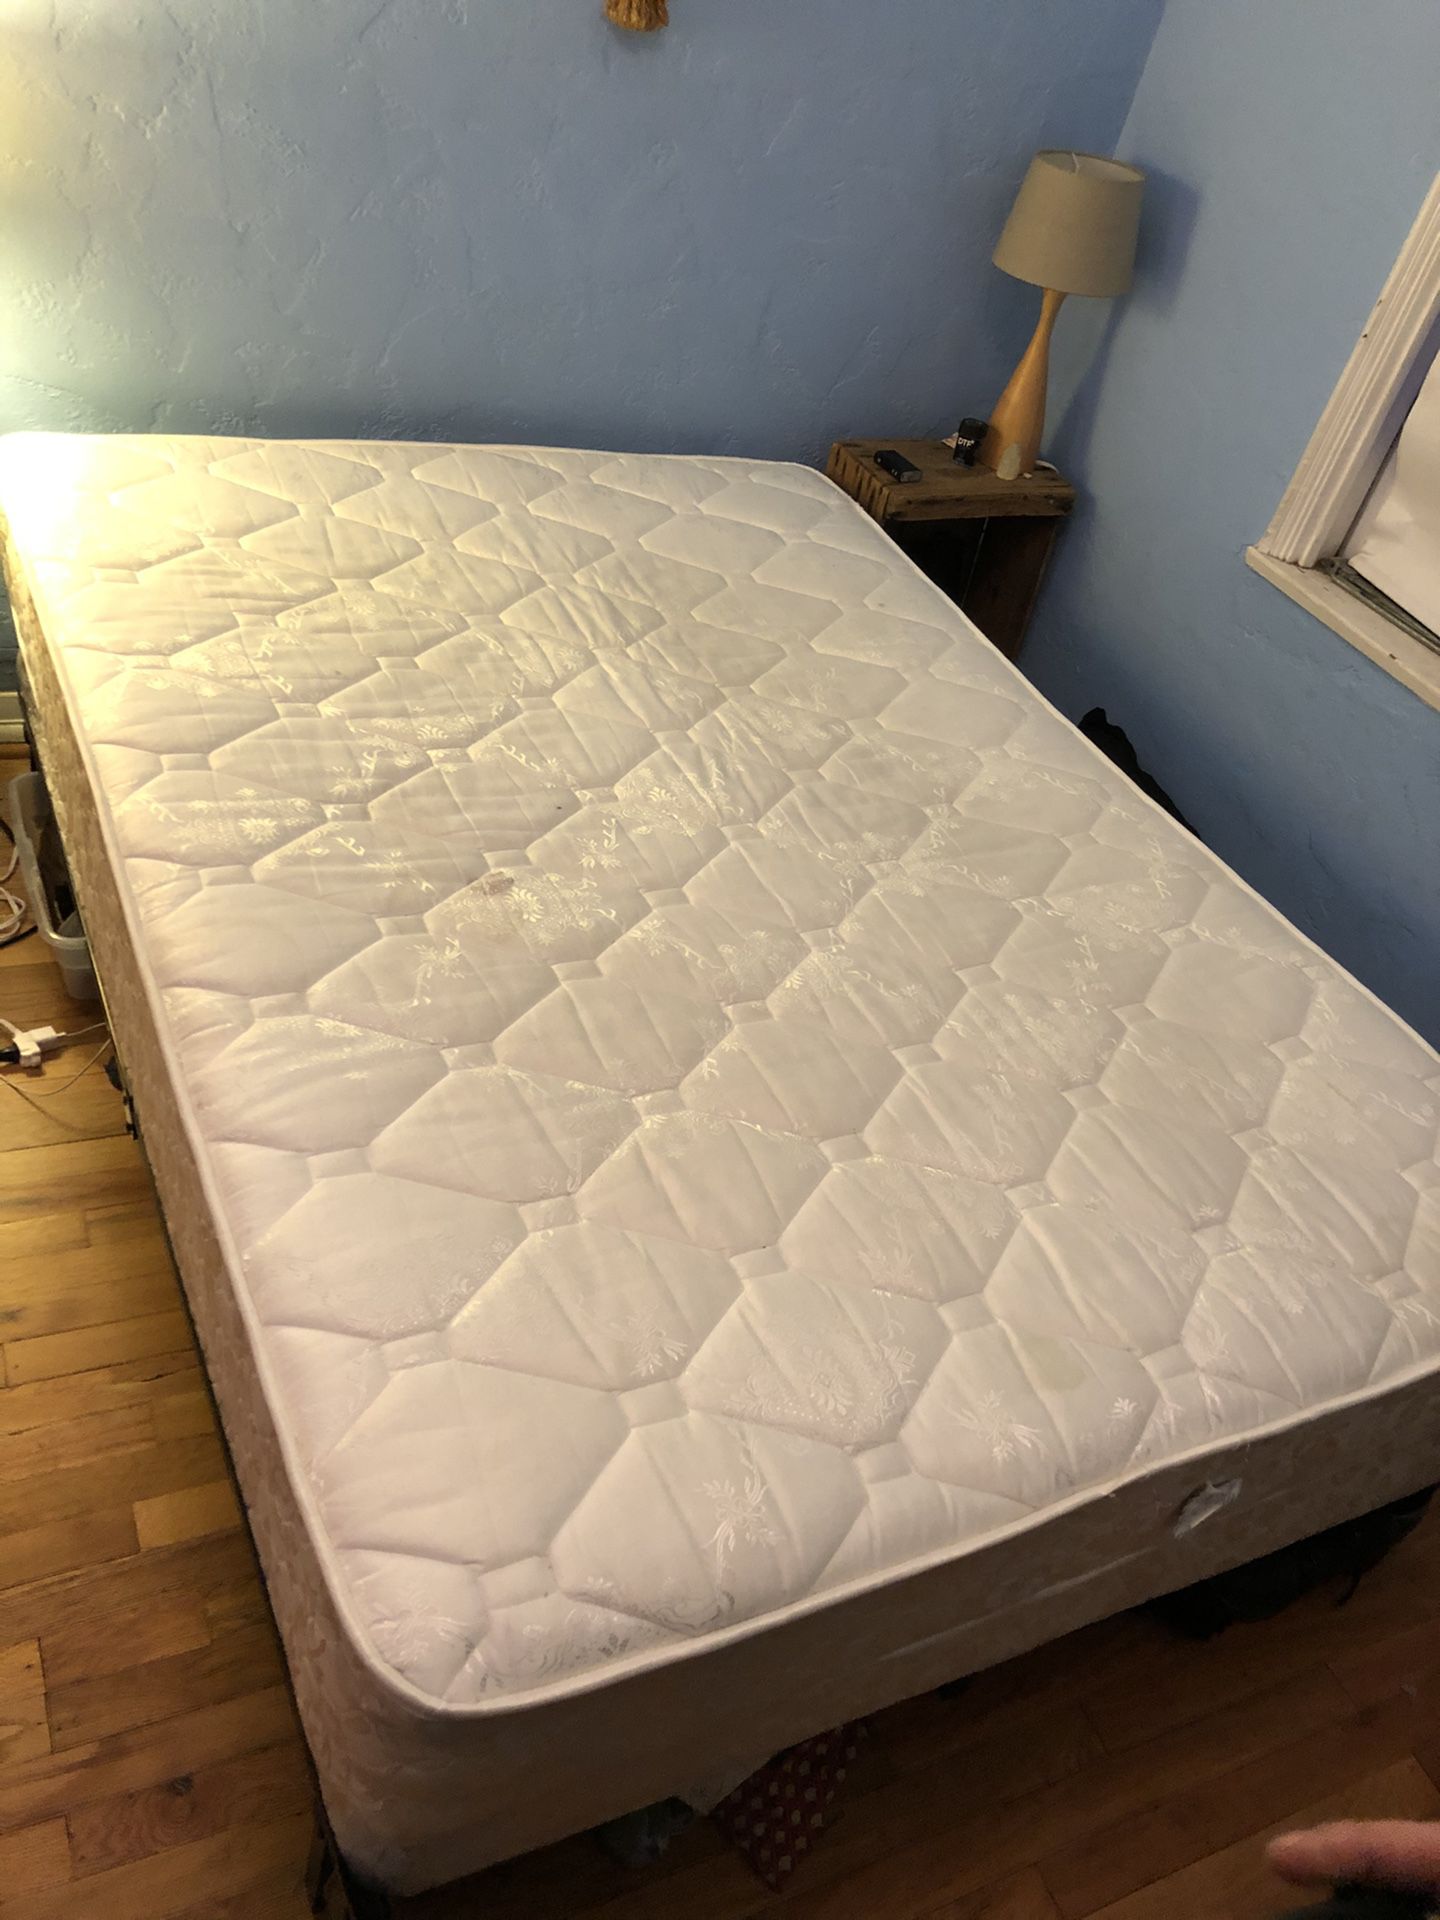 Full mattress, box spring and bed frame